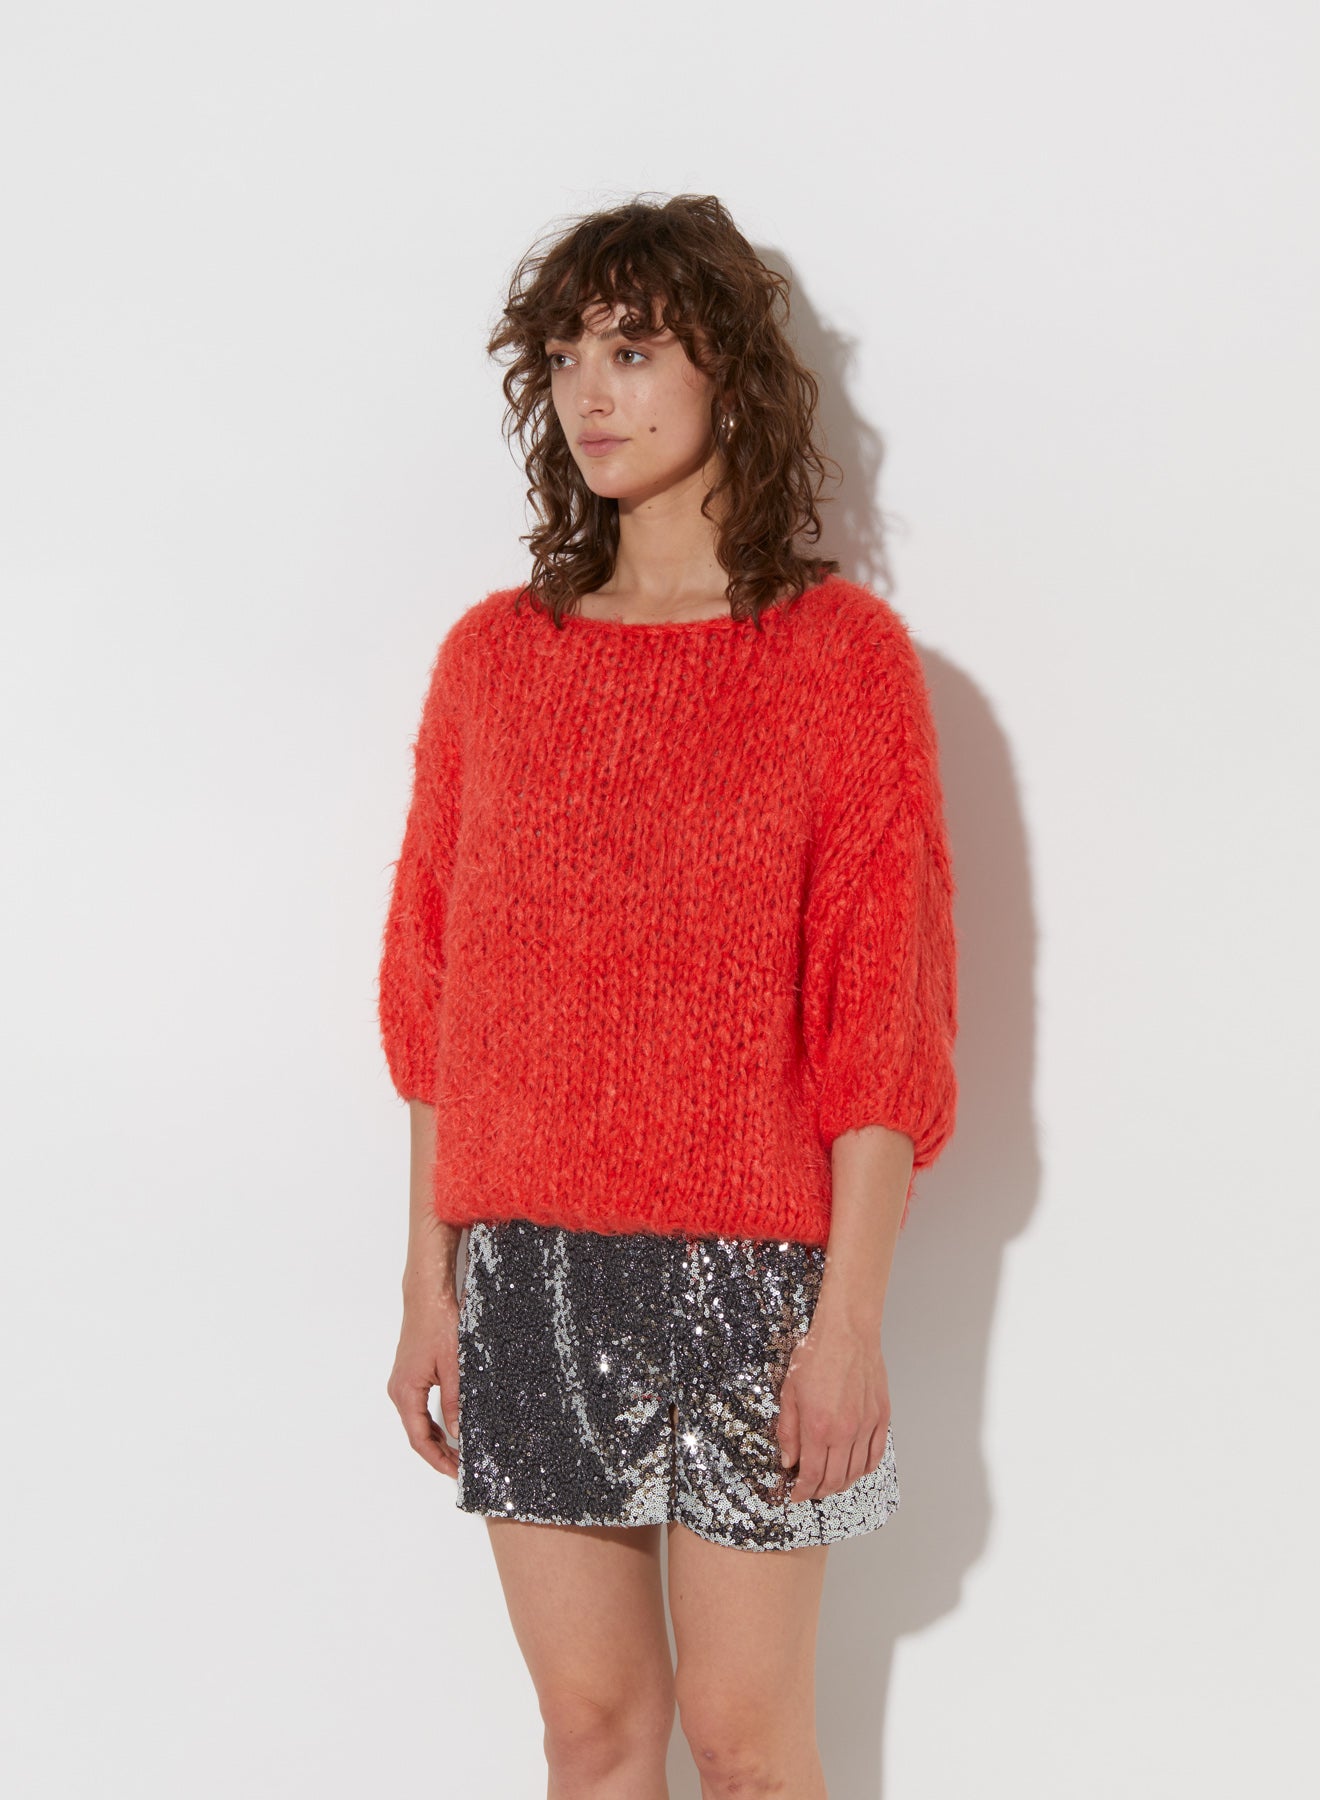 Silk Knit, Neon Red, Pullover